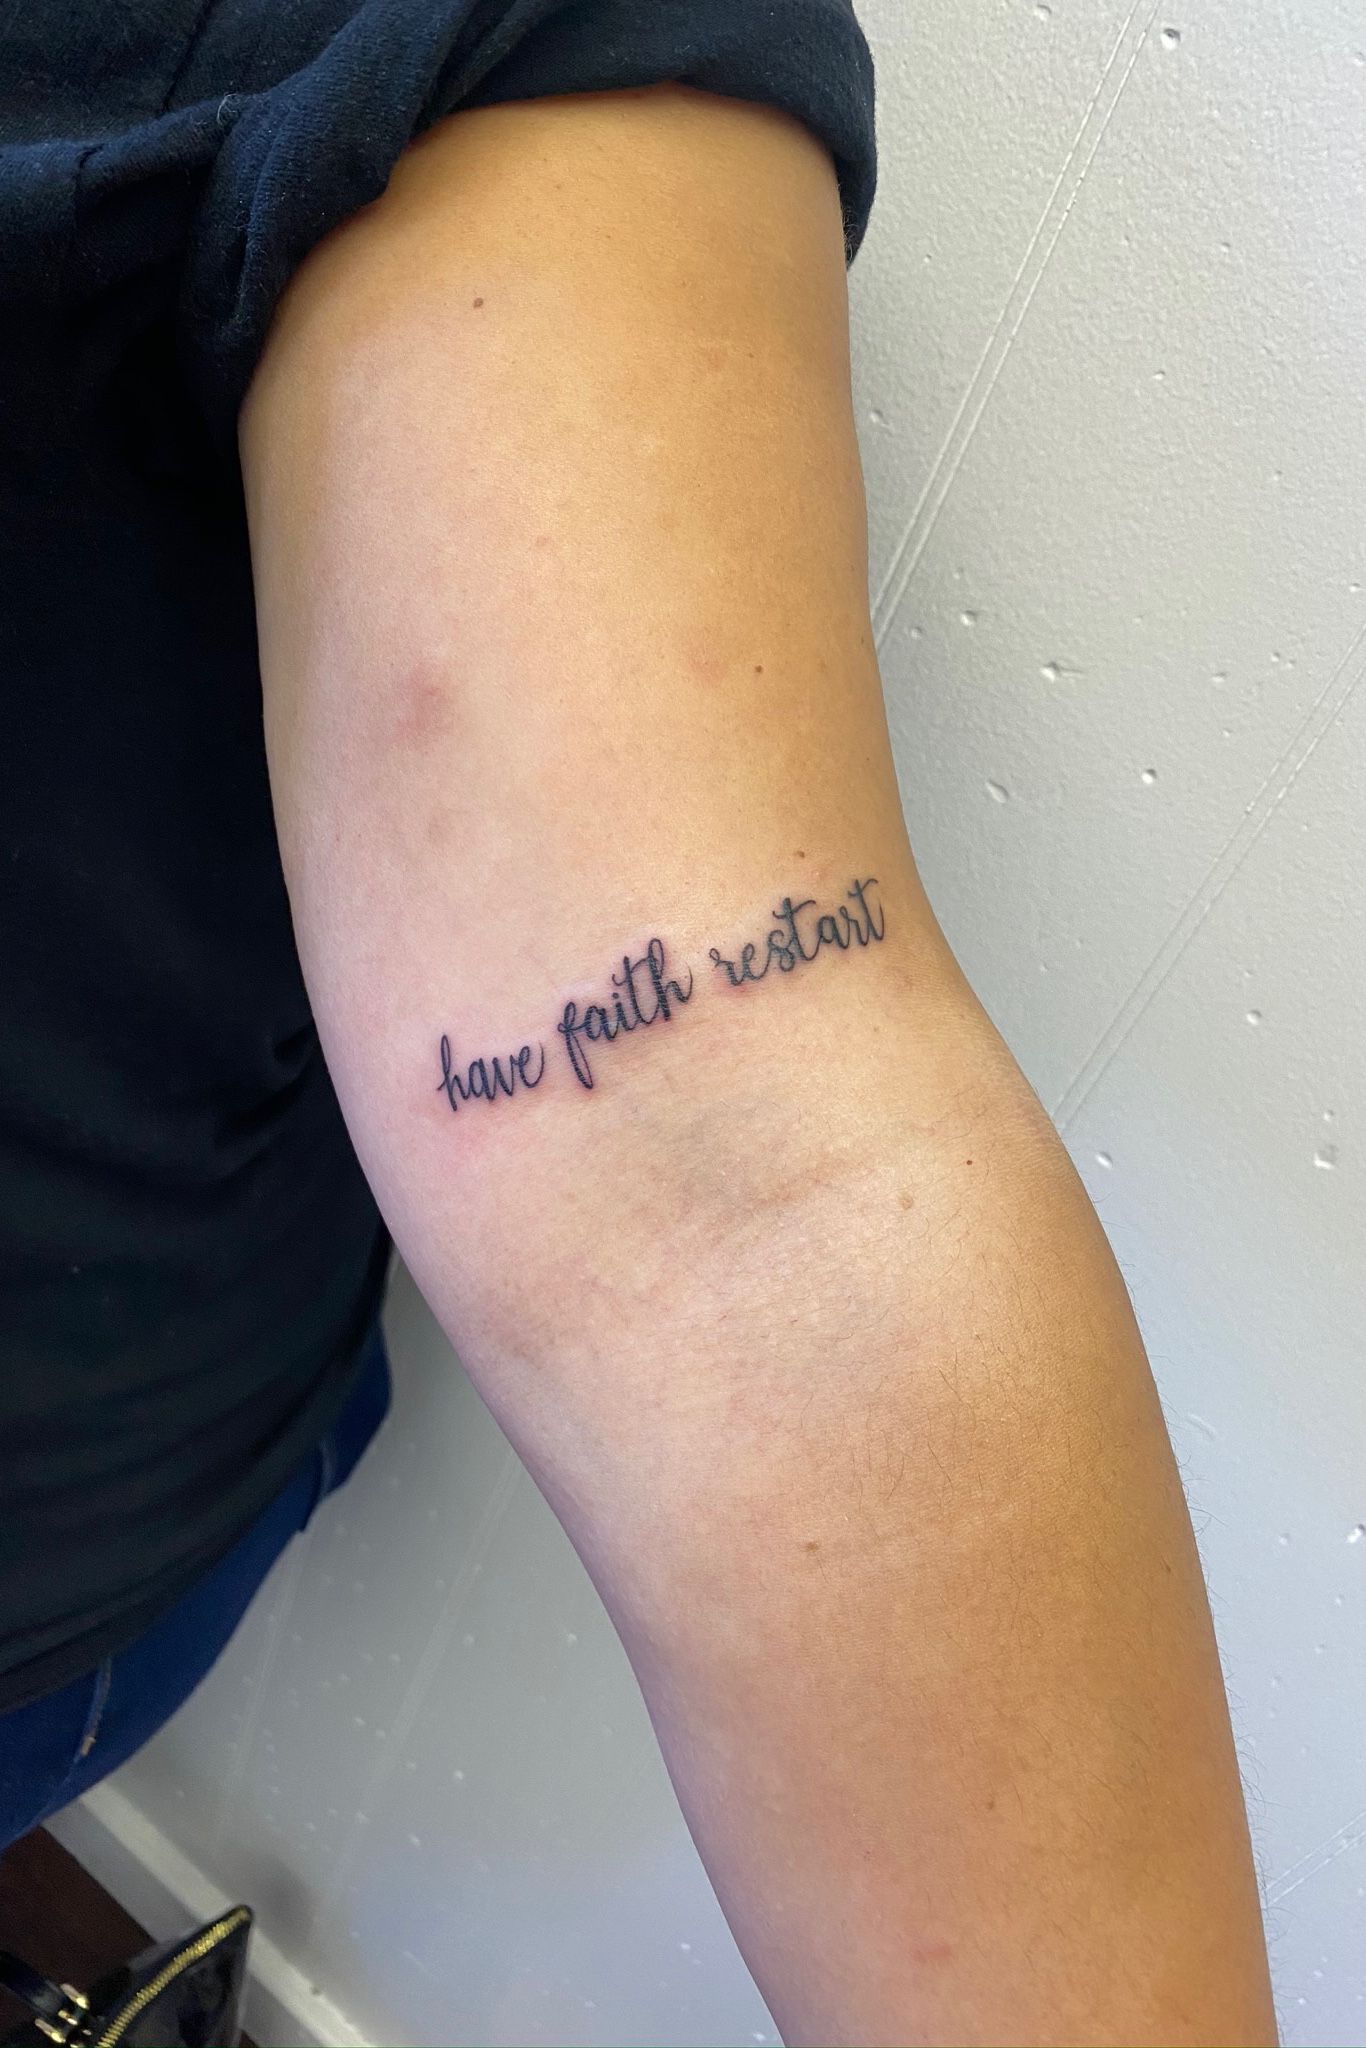 60 Best Tattoo Quotes, Words, and Sayings - TatRing